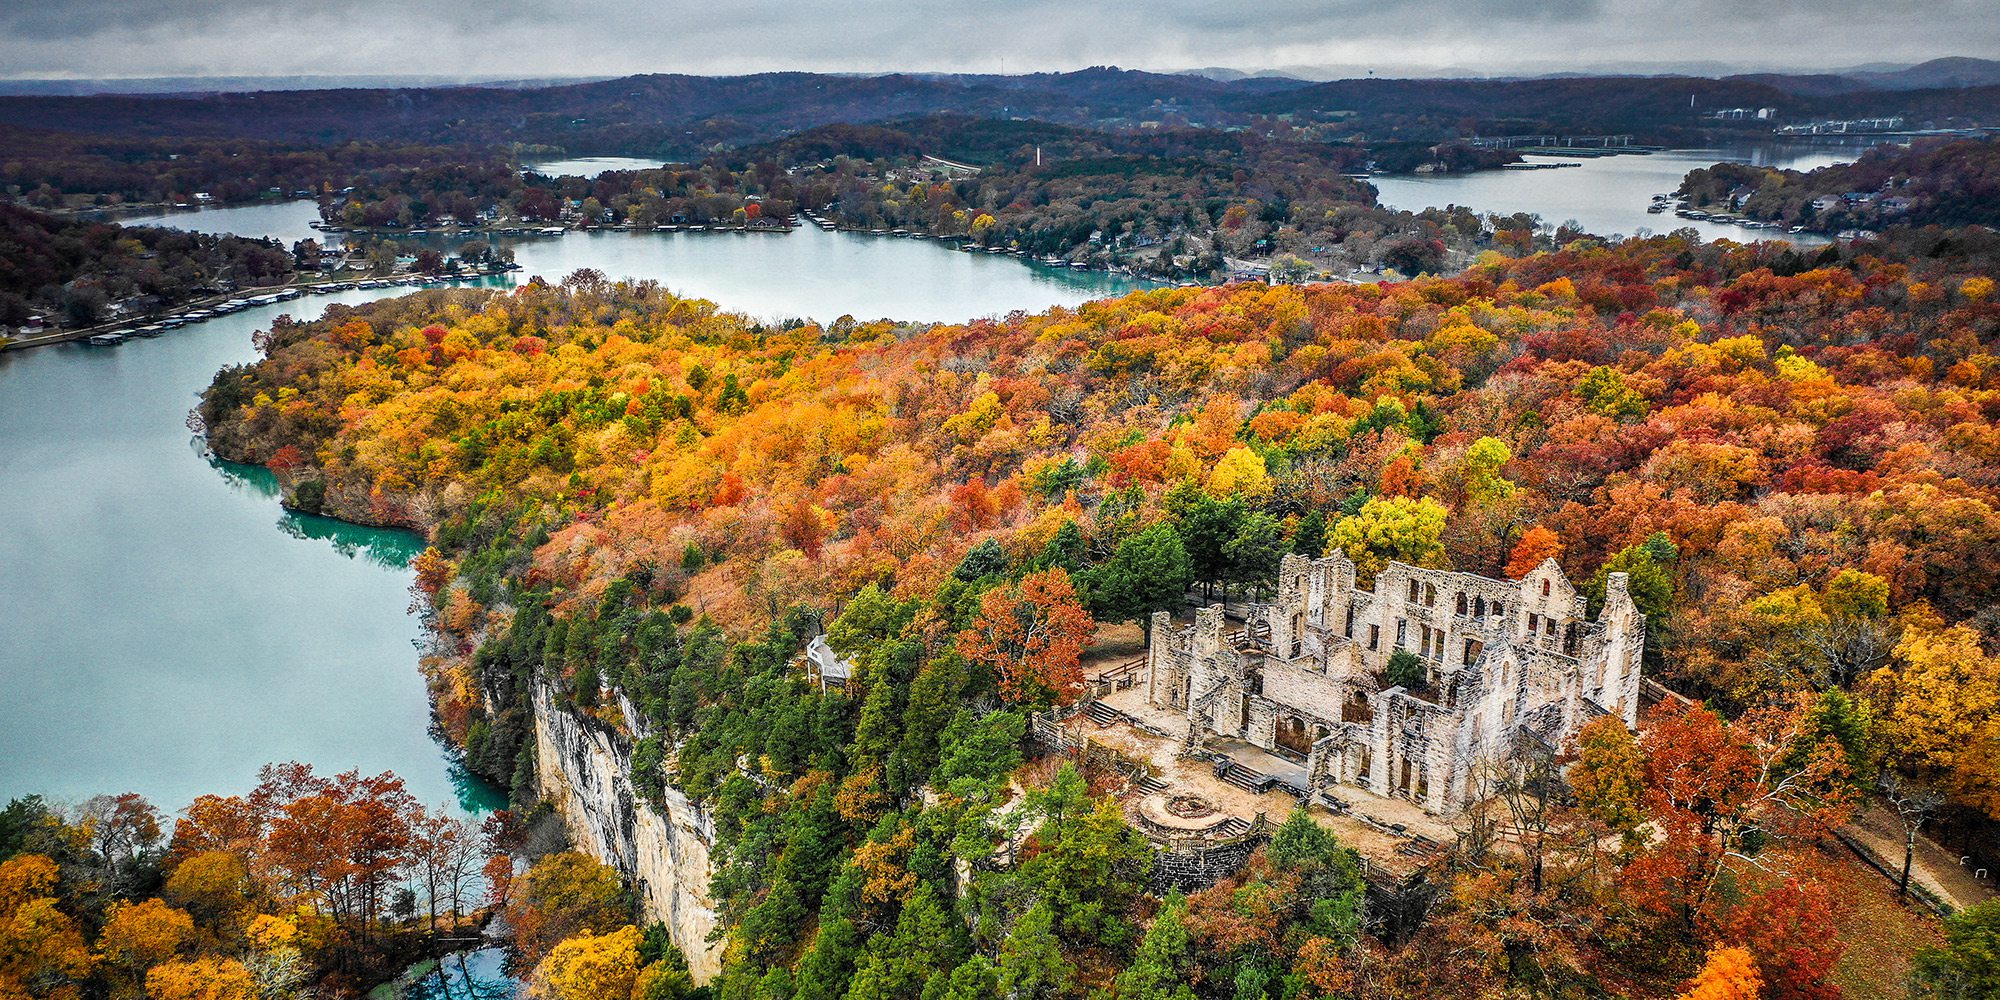 Unveiling the Geological Marvels of Ha Ha Tonka State Park